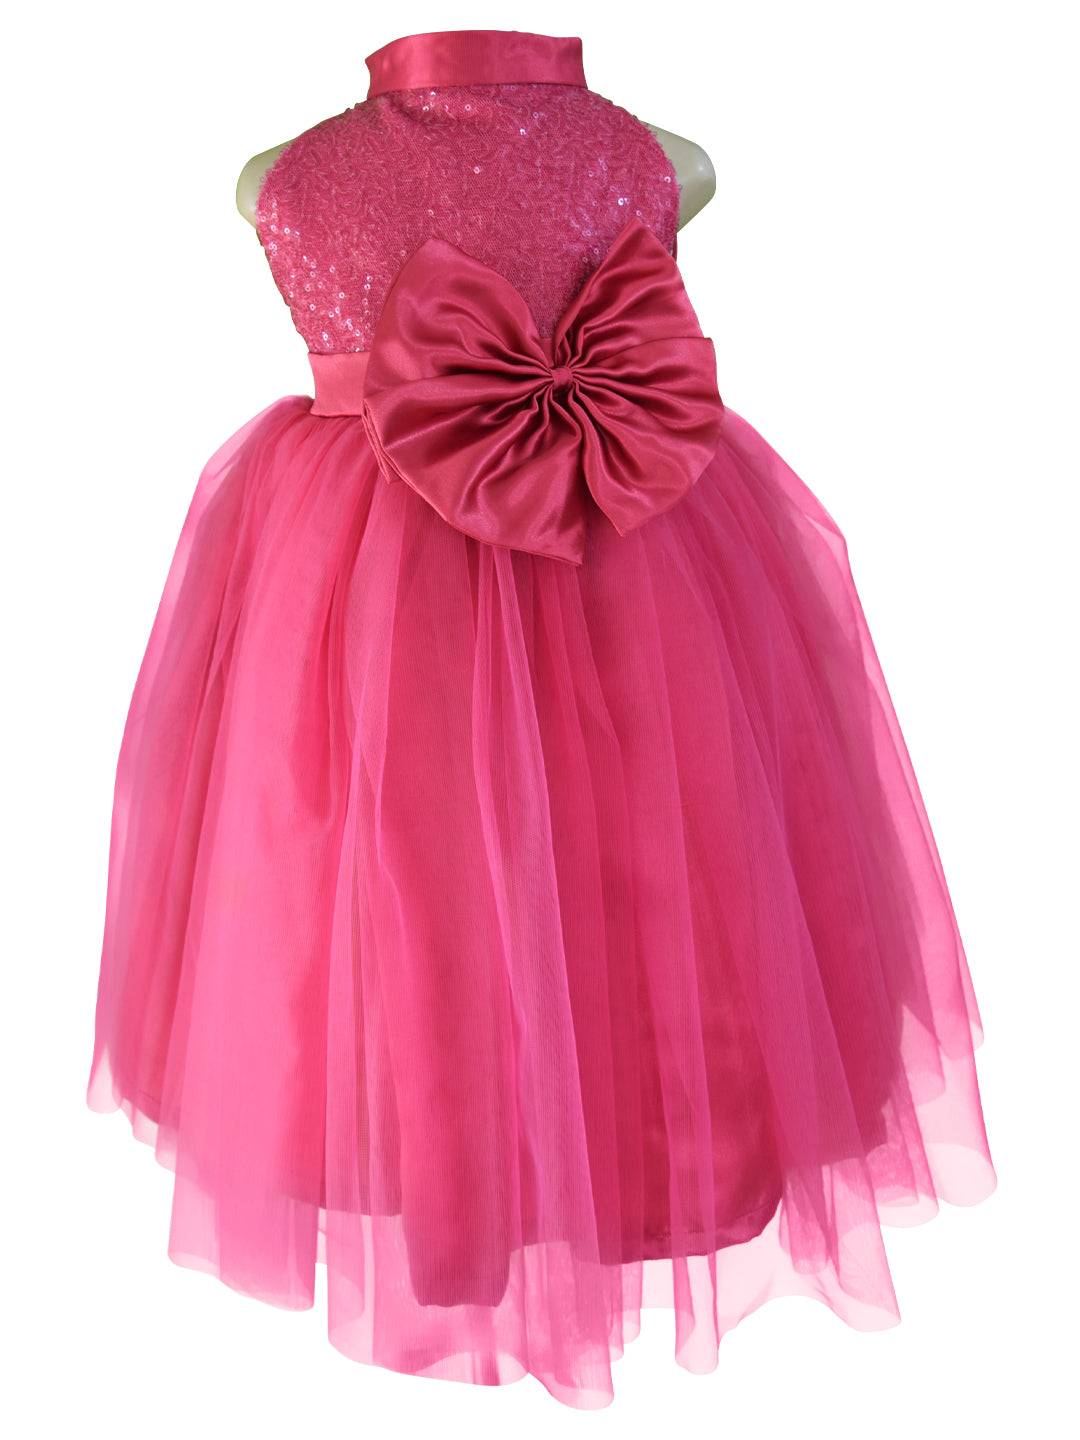 Gowns for Girls | Faye Fuchsia Sequin Gown - faye